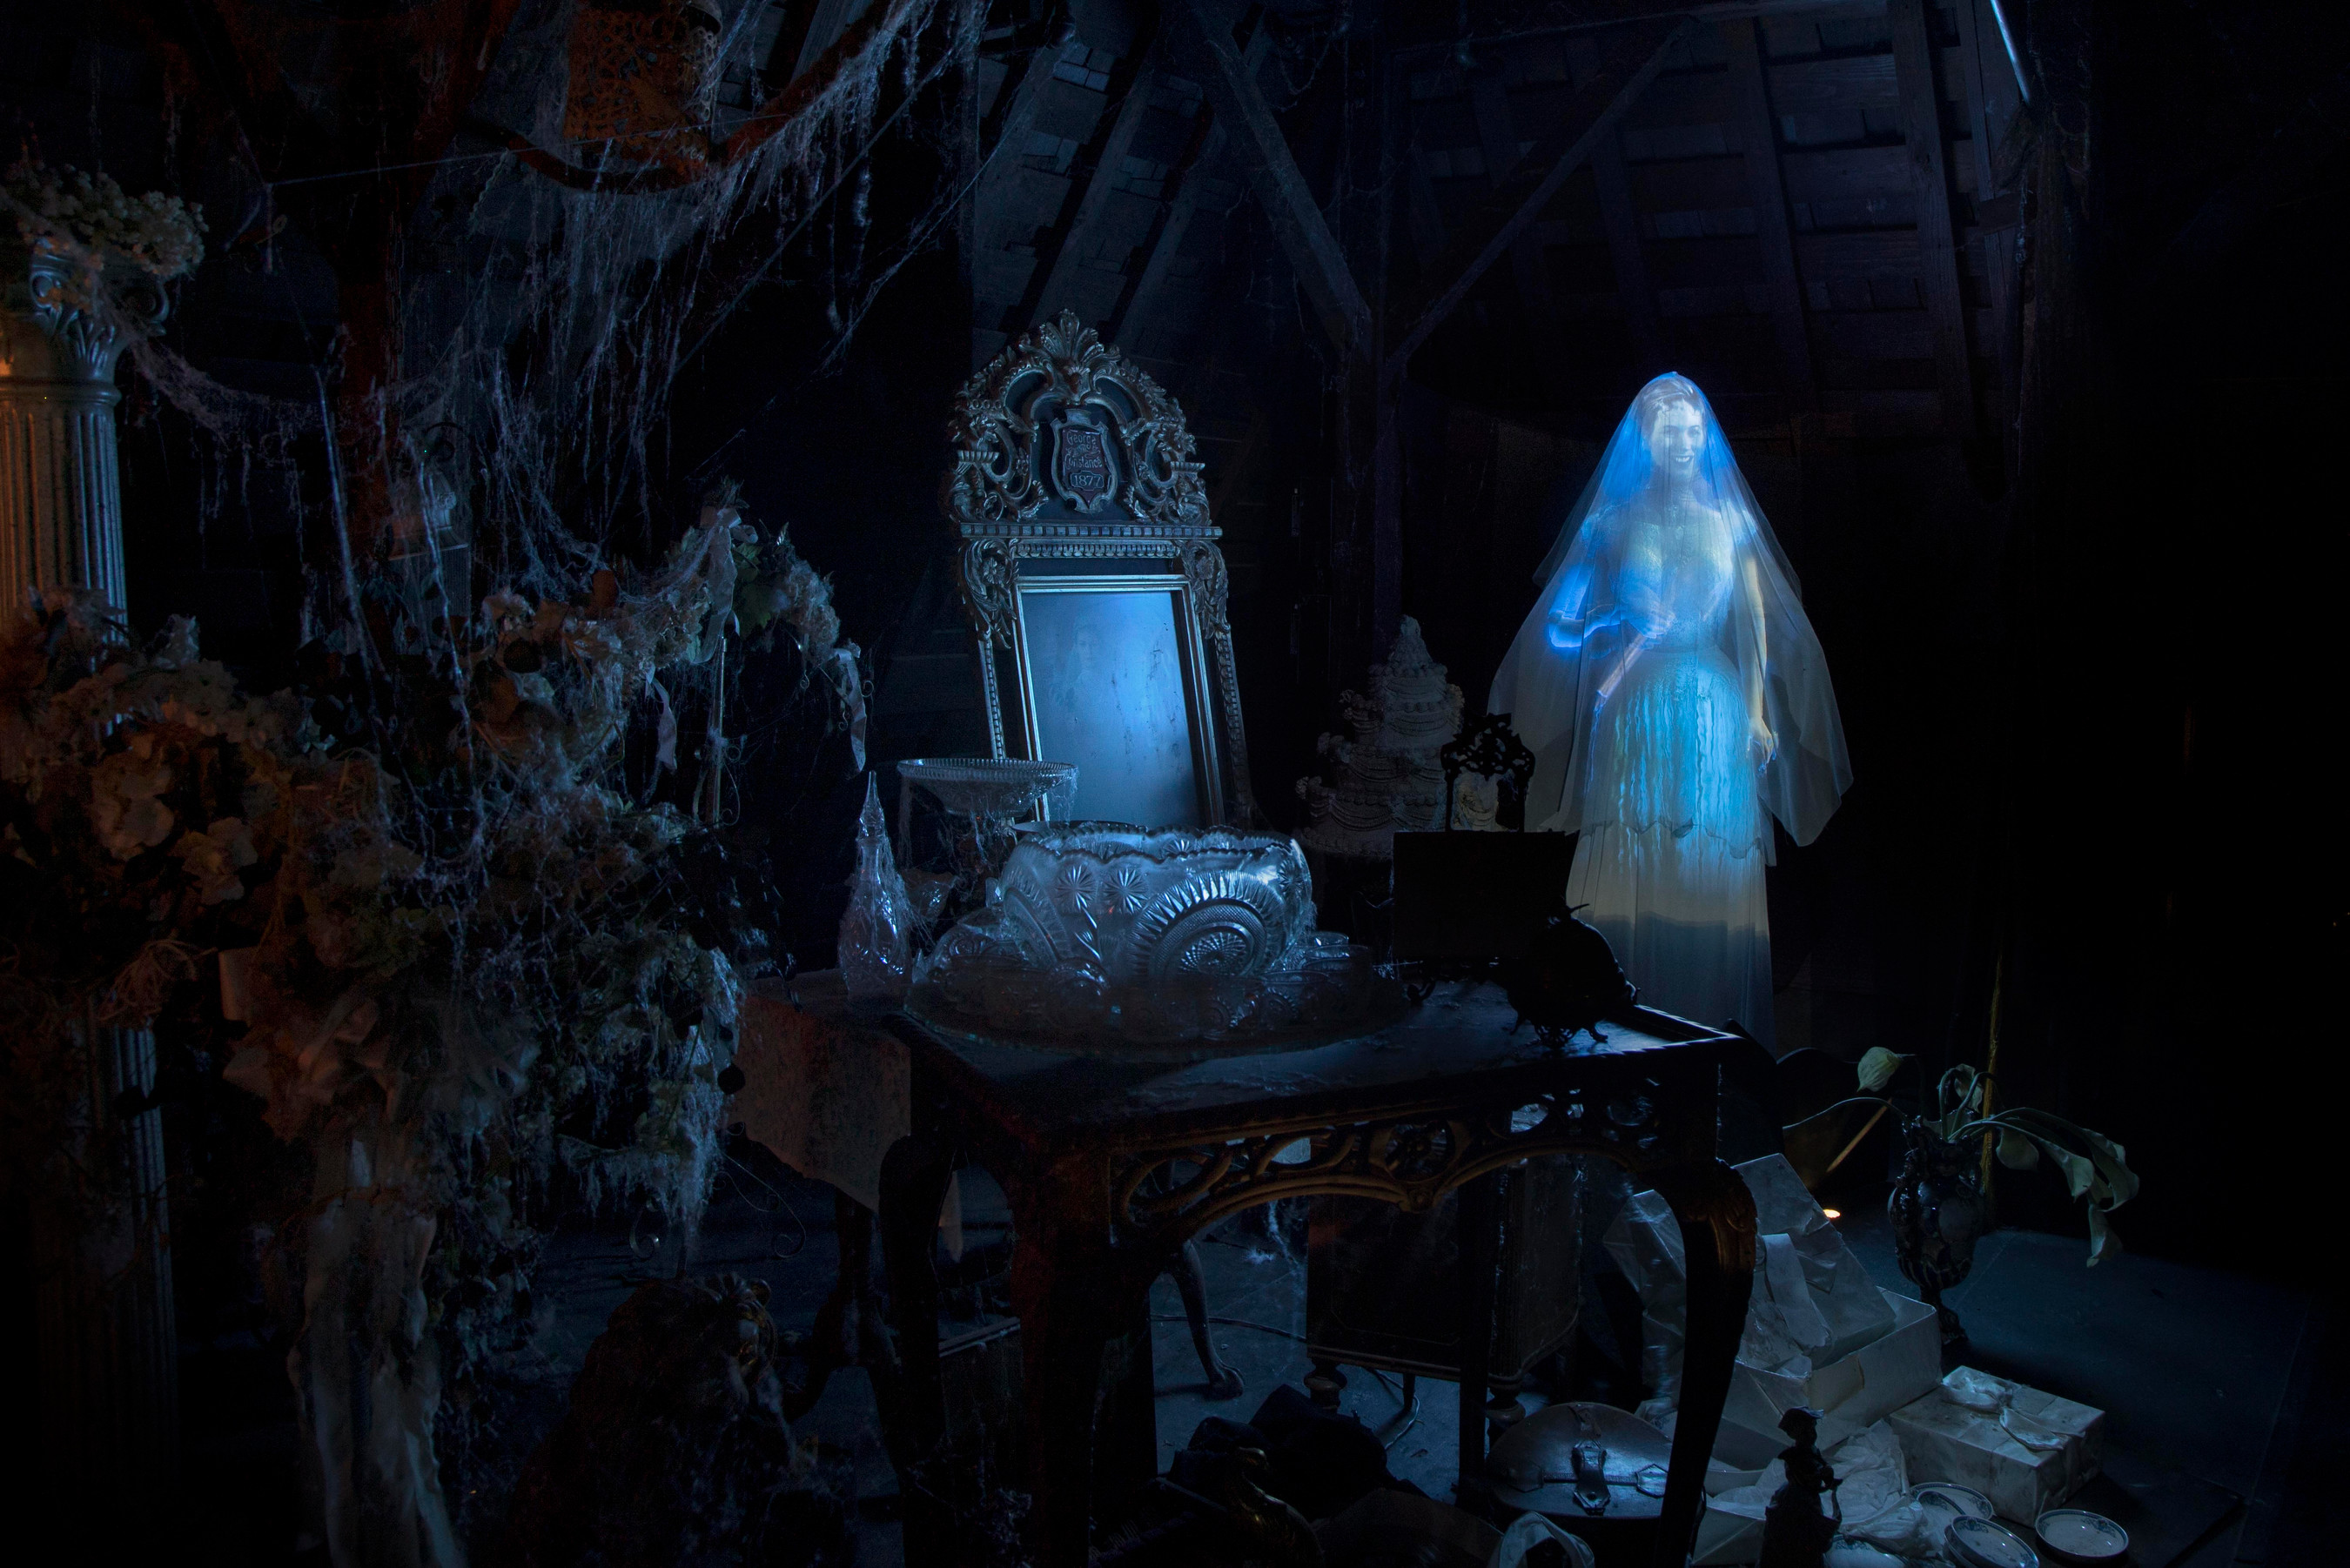 Guests touring the Haunted Mansion at Disneyland Park encounter many spooky...